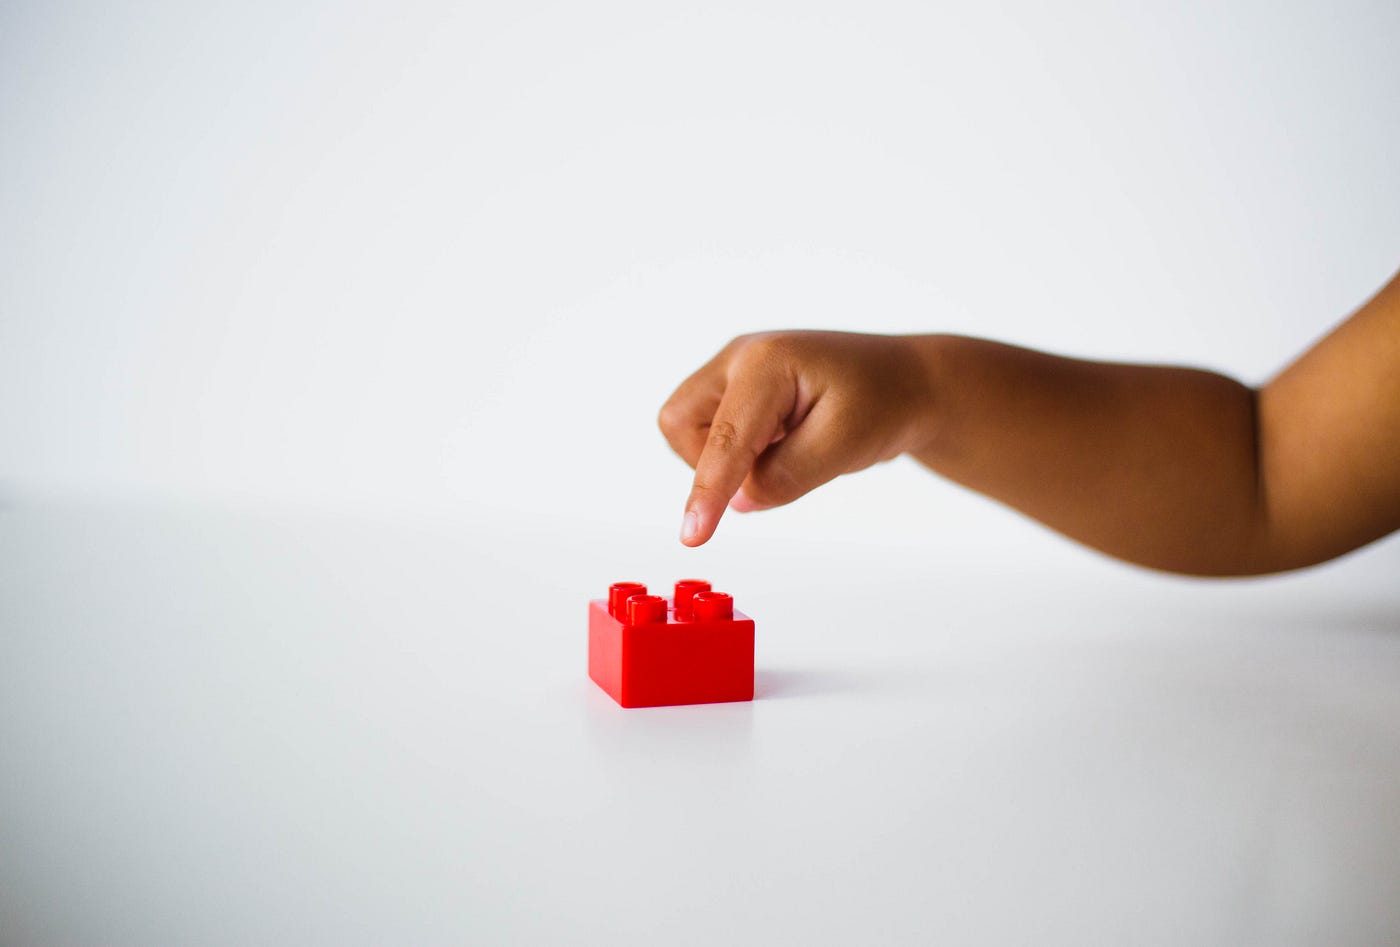 The arm of a black toddler extends from the right of the mage to almost touch a red LEGO piece. The US Centers for Disease Control (CDC) offers that individuals with an autism spectrum disorder may demonstrate restricted or repetitive behaviors or interests.